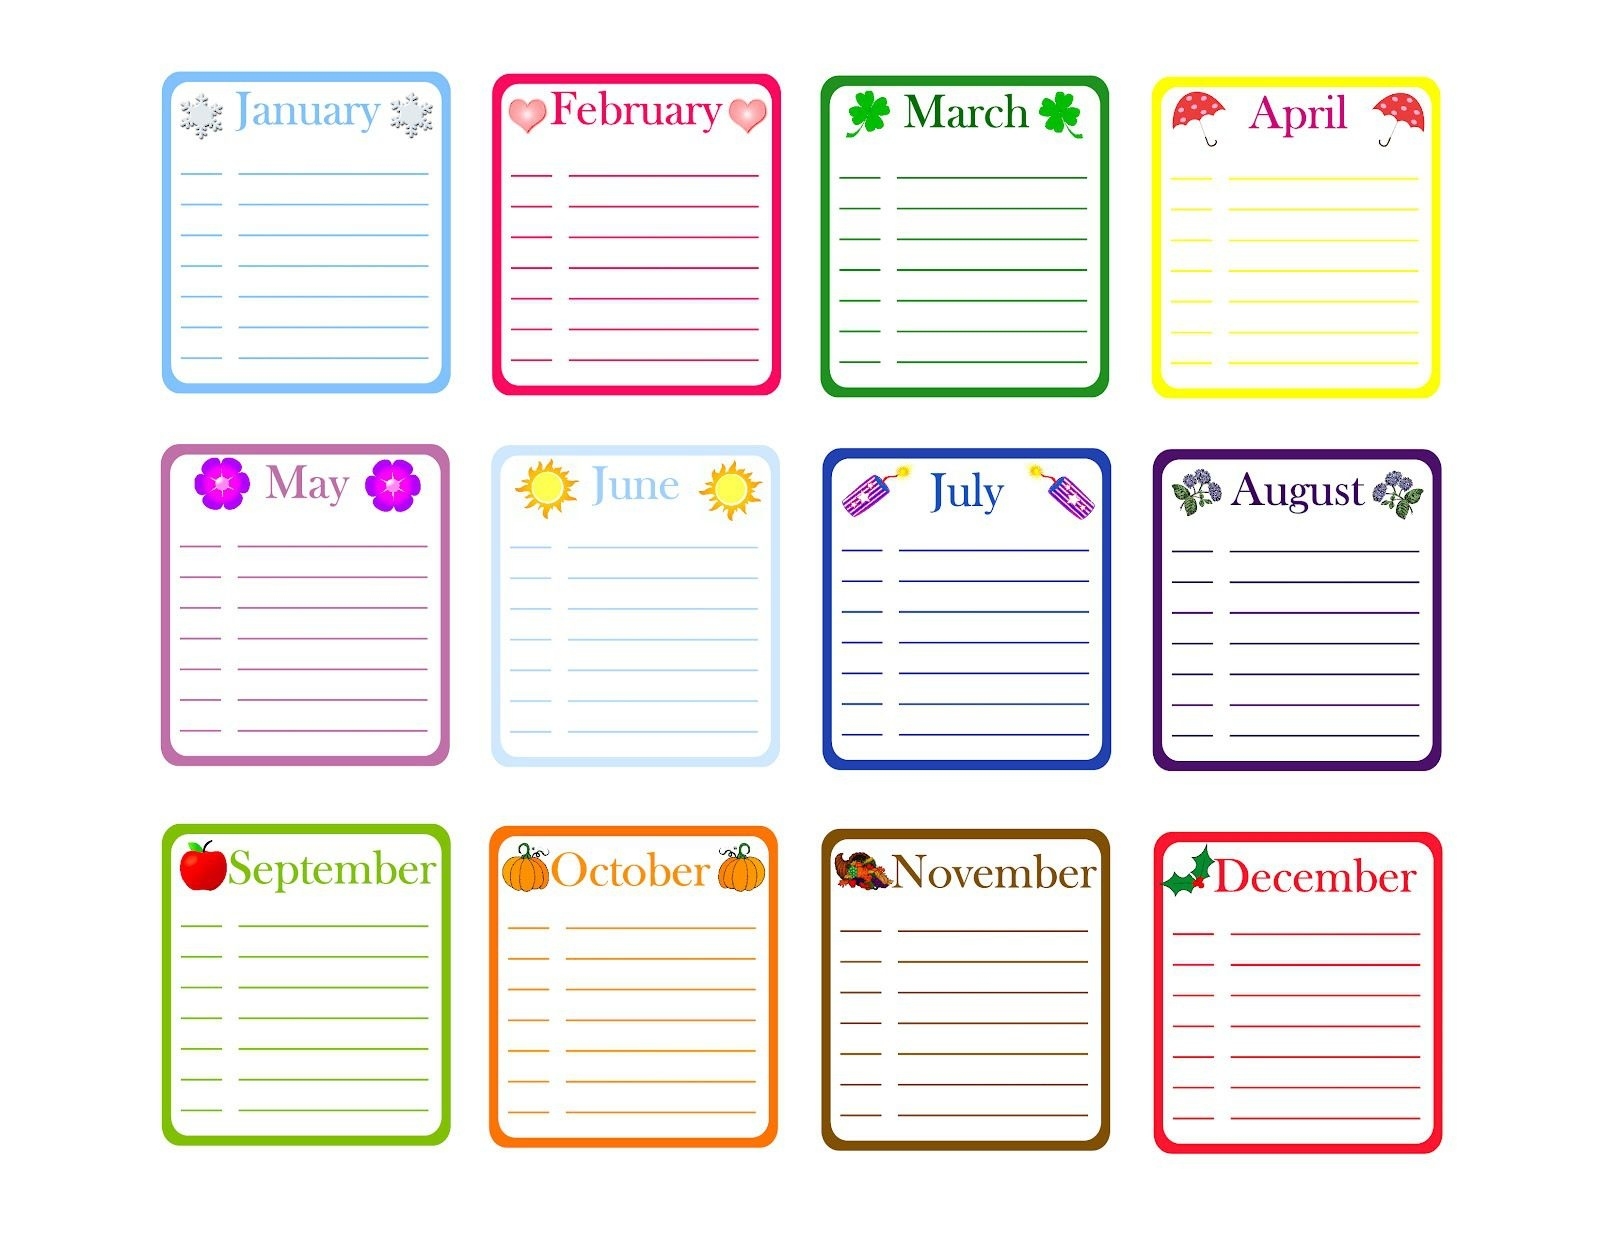 Yearly Birthday Calendar Template. Free Classroom Printables Incredible Free Printable Birthday Calendar Template